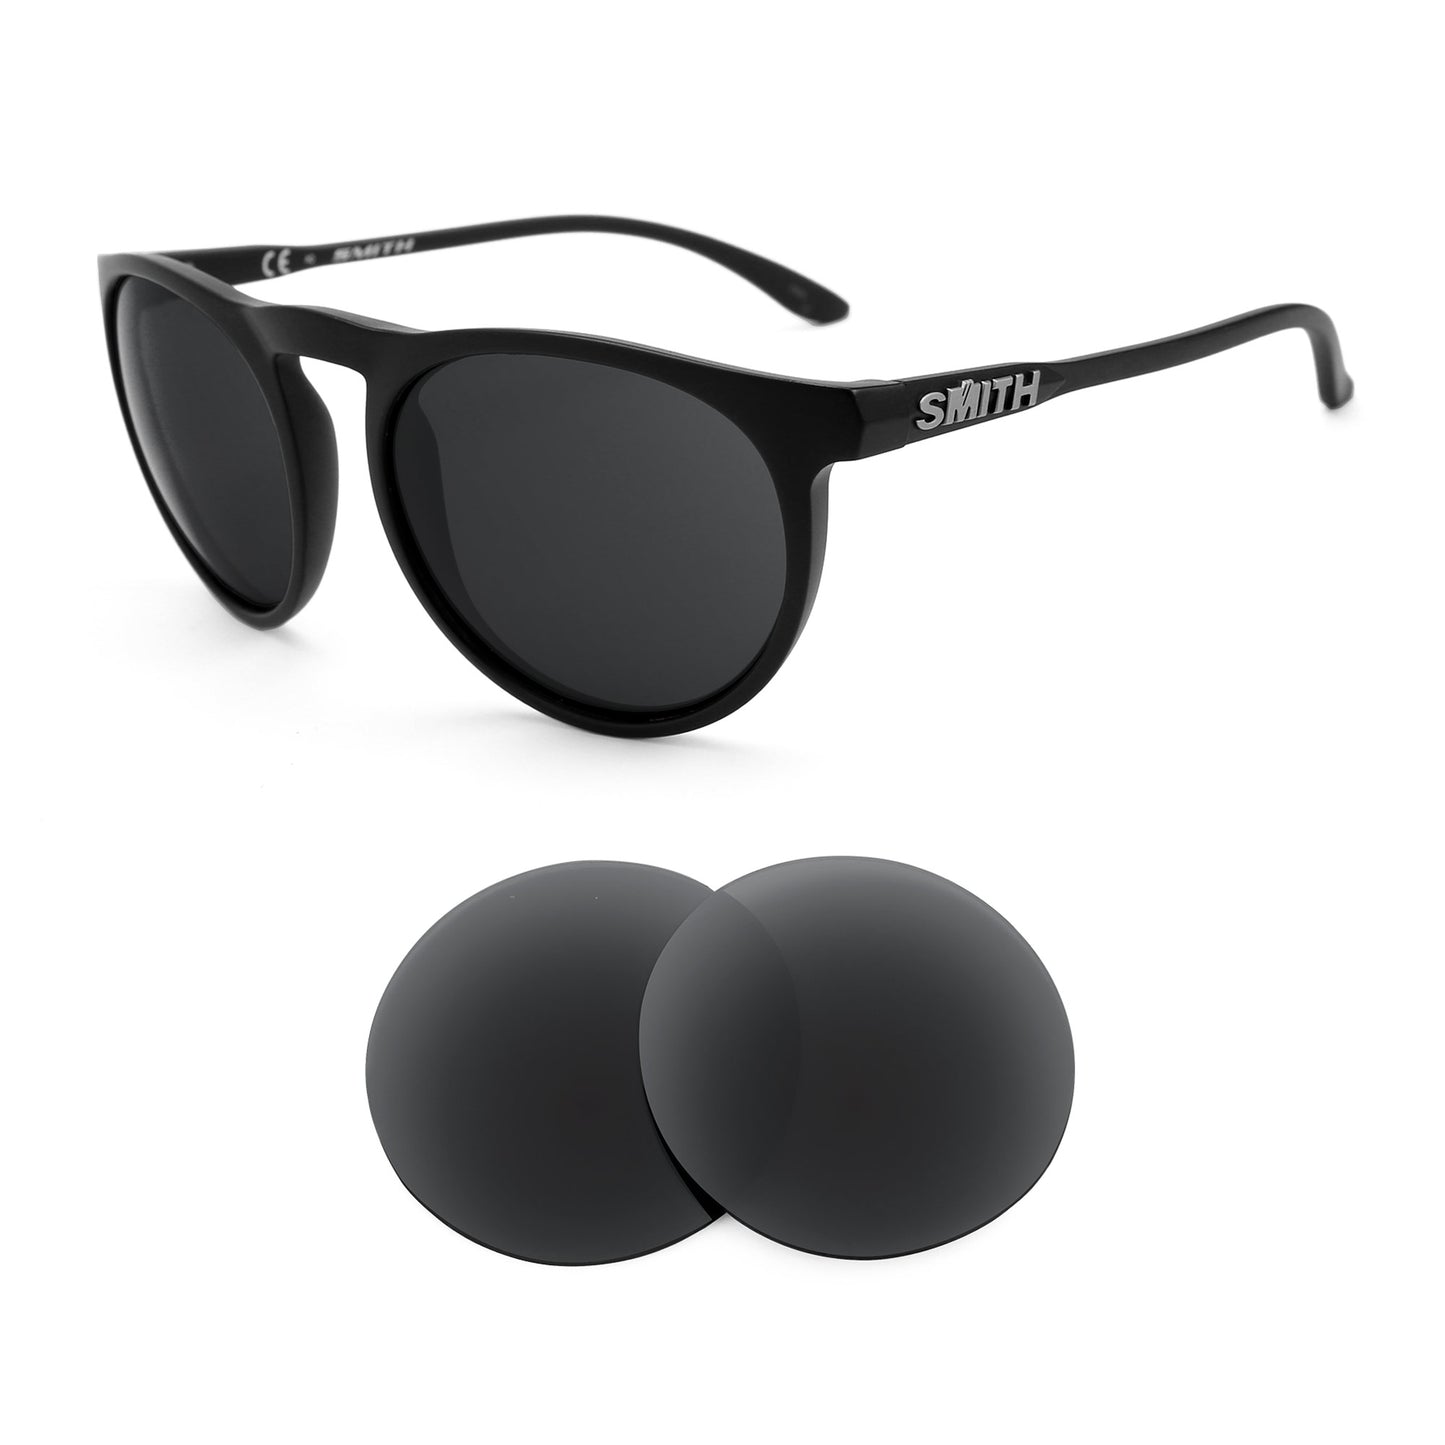 Smith Marvine sunglasses with replacement lenses